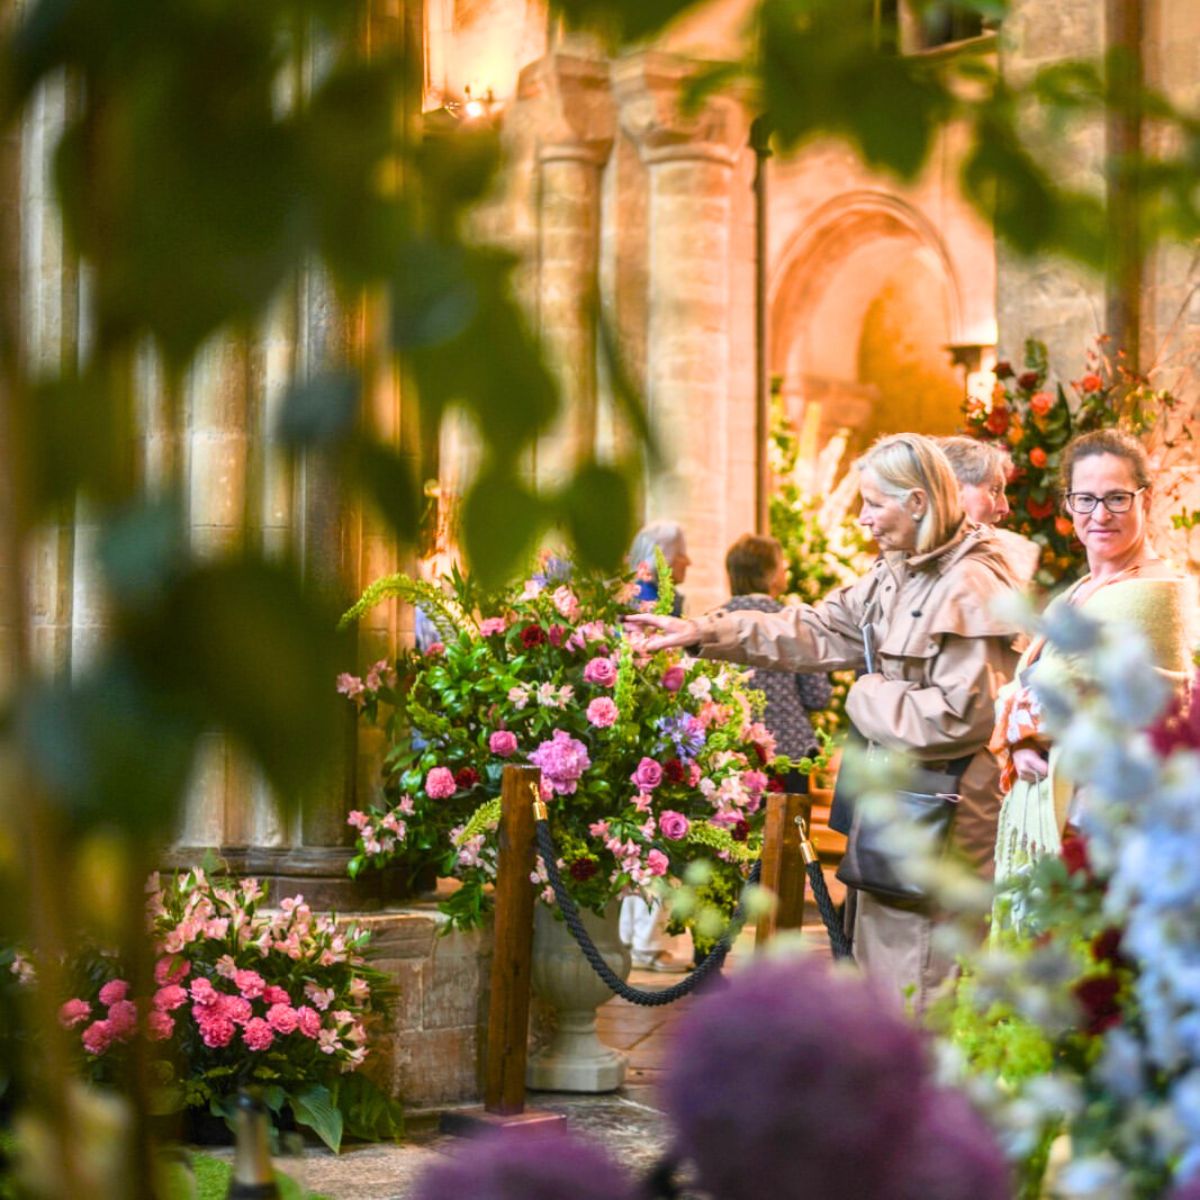 People visiting the Festival of Flowers in the Cathedral